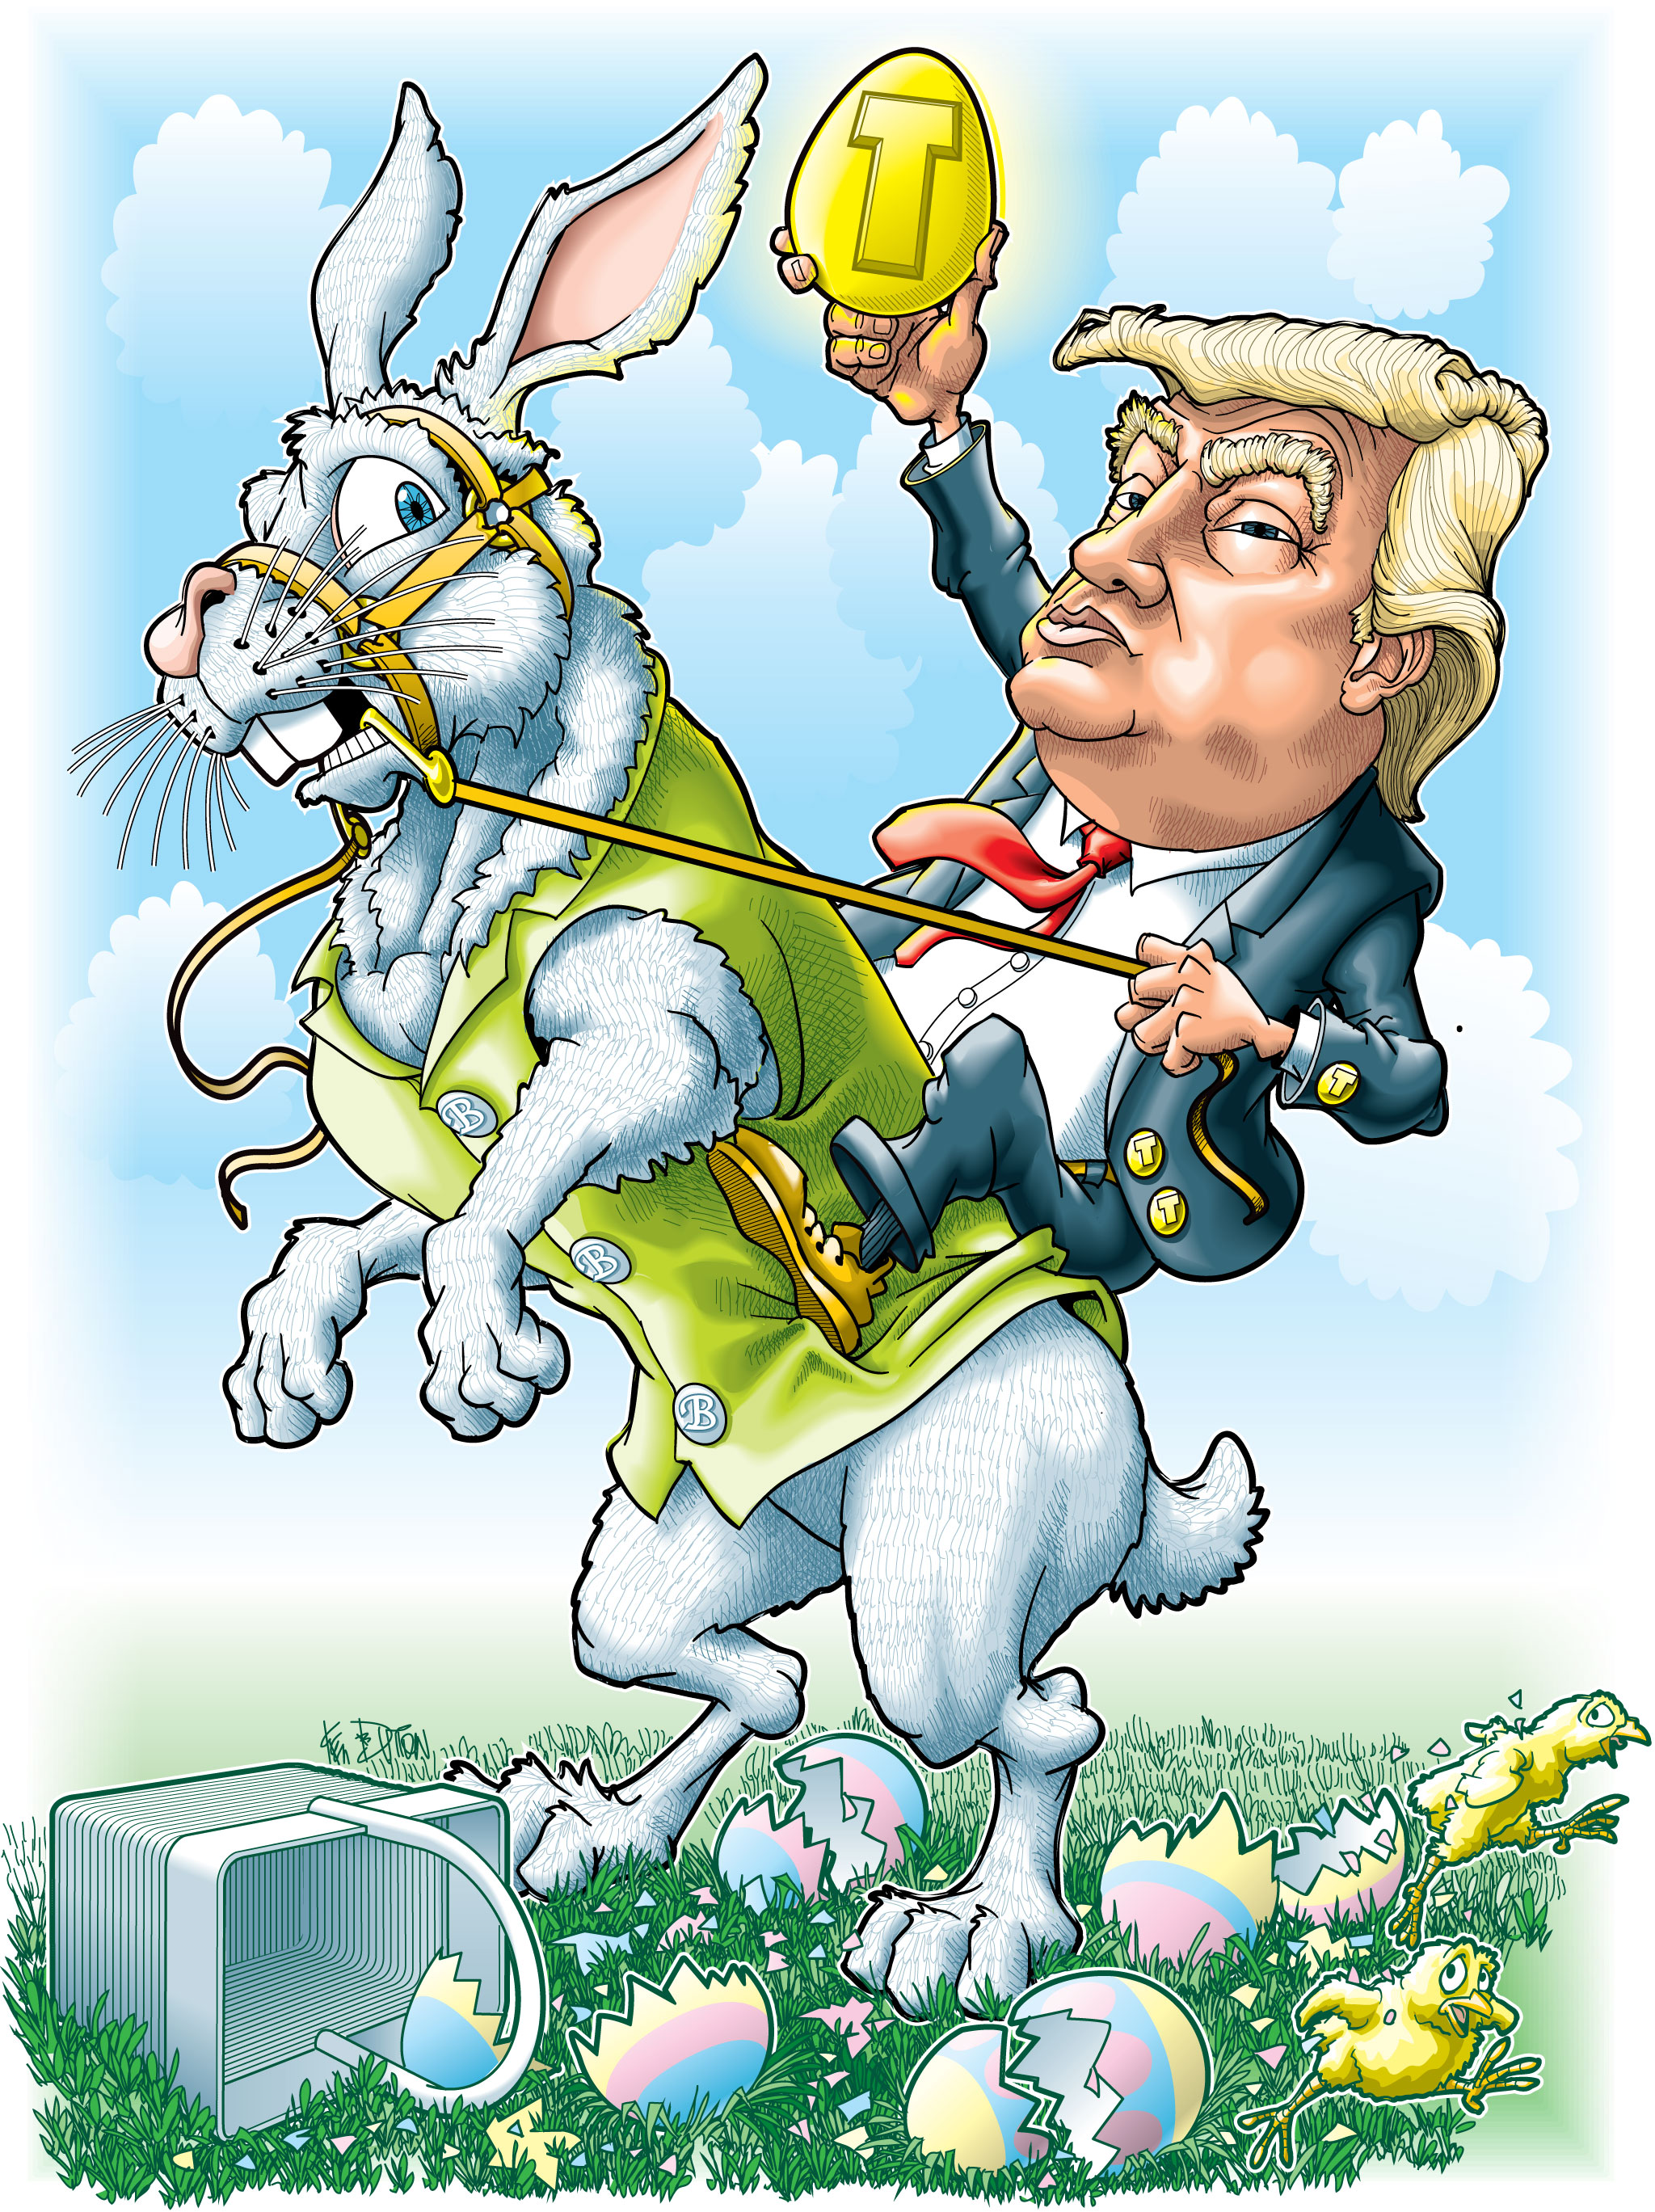 13_Easter_Bunny_in_Chief_041417.jpg